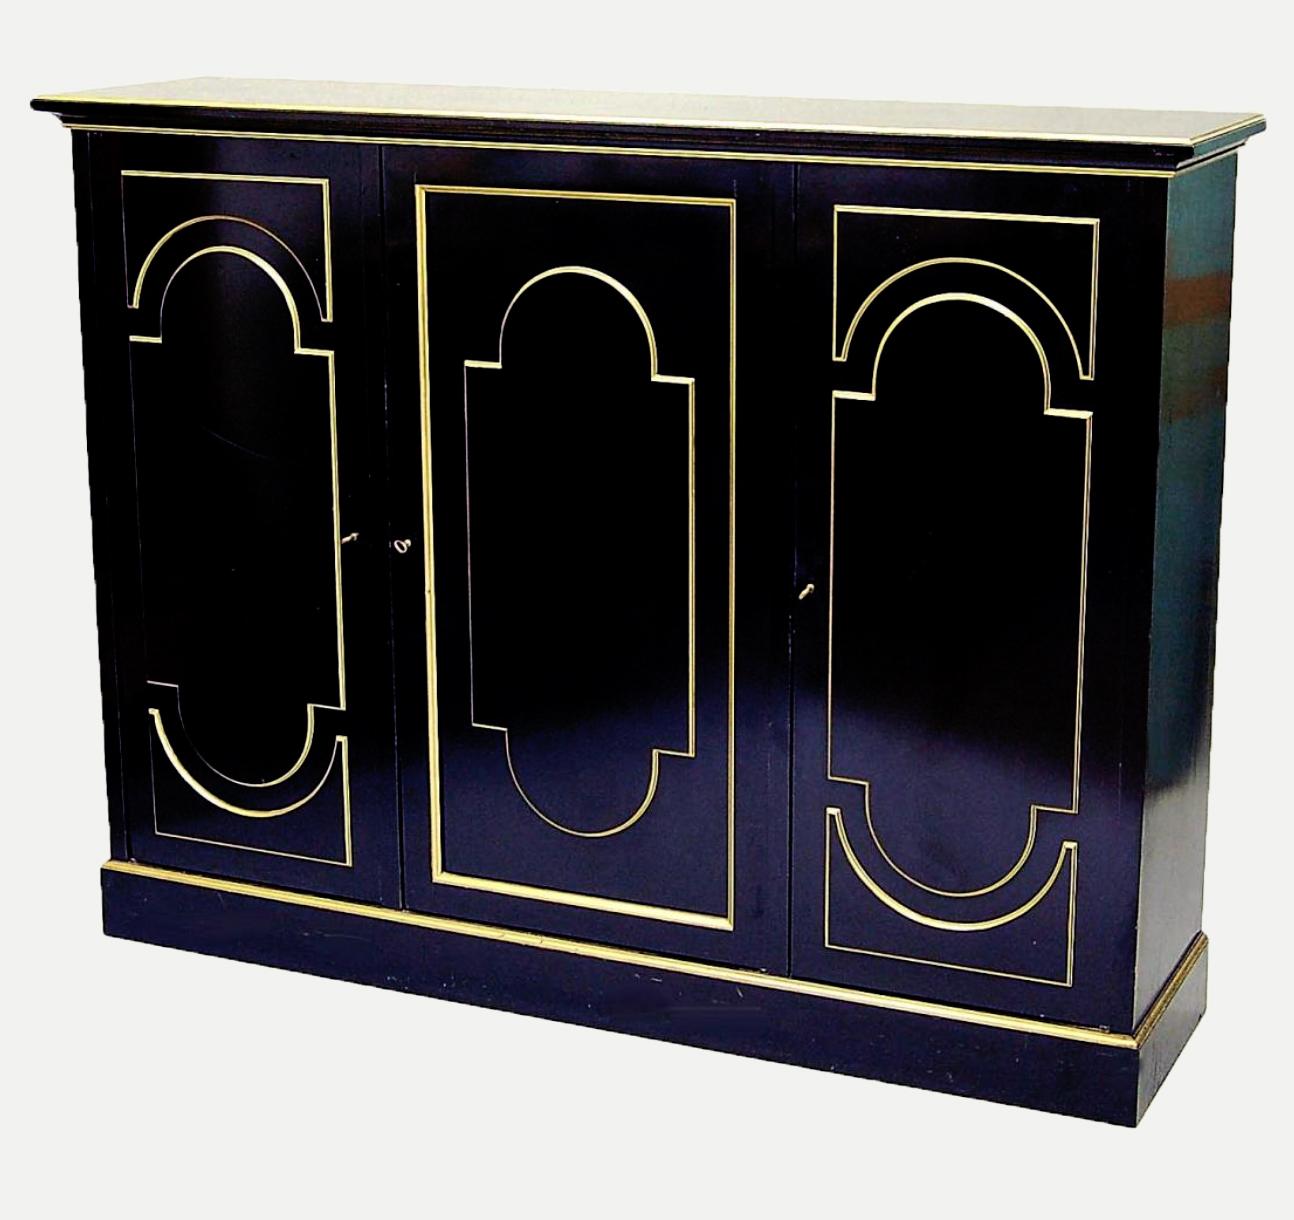 This luxurious cabinet is signed by neoclassical designer Maurice Hirsch. Typical of the designer, the piece was inspired by the 19th century, albeit with a contemporary twist. Rich, black wood makes up the body of the cabinet, and it’s been